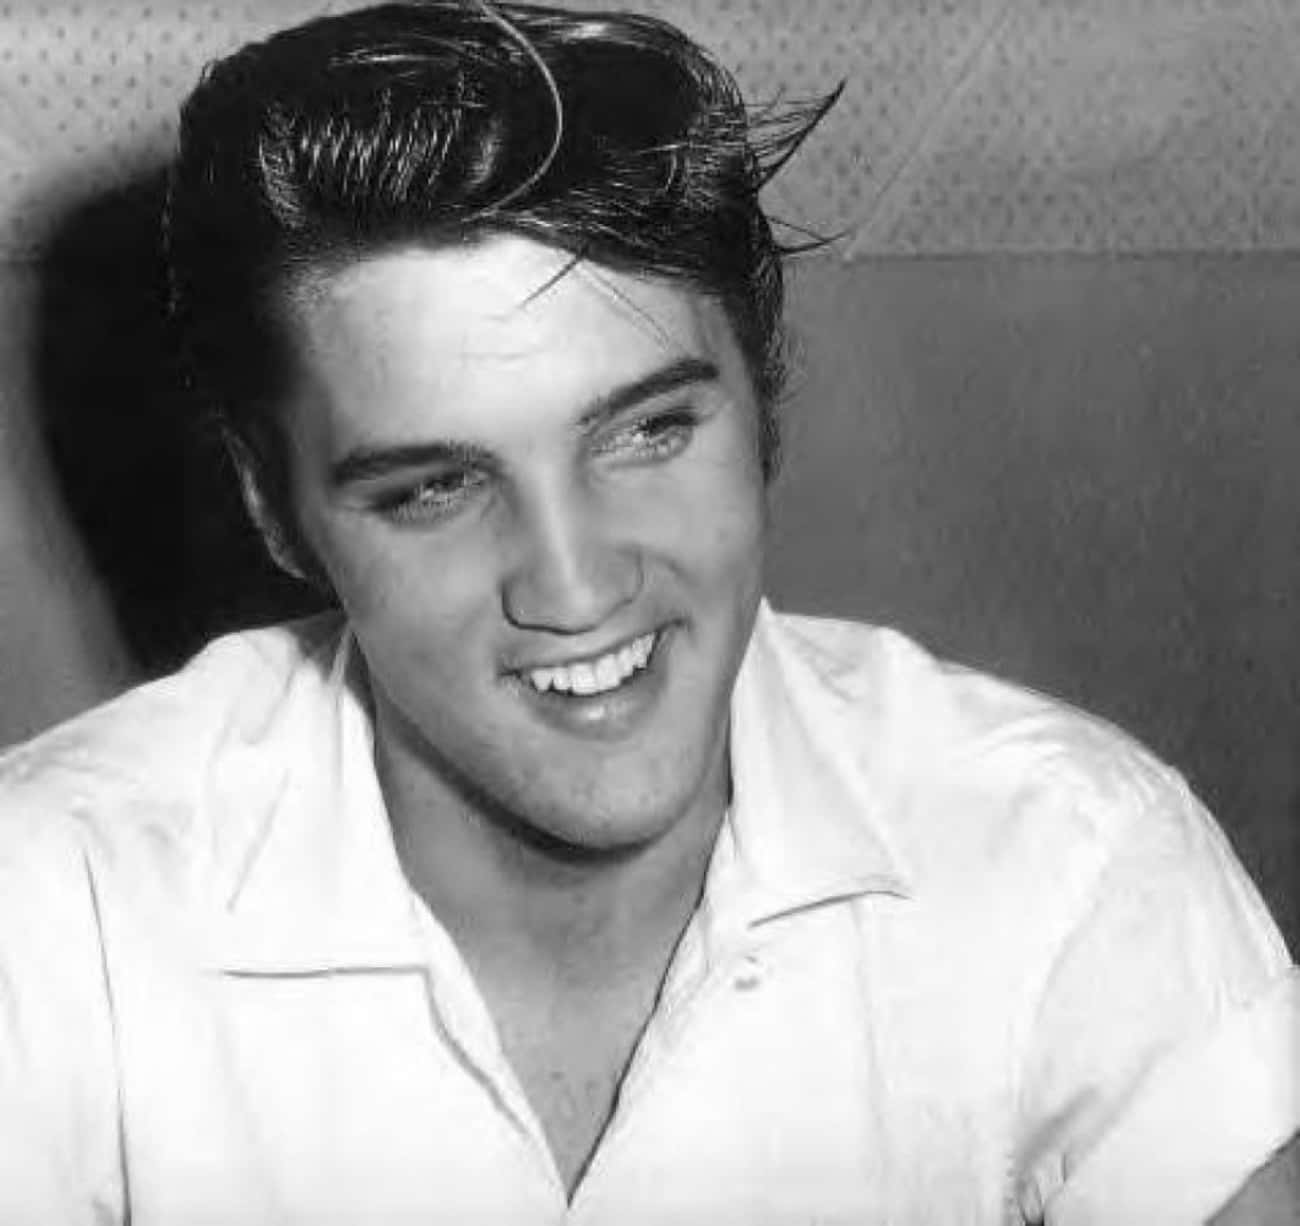 Young Elvis Presley in White Buttondown Shirt